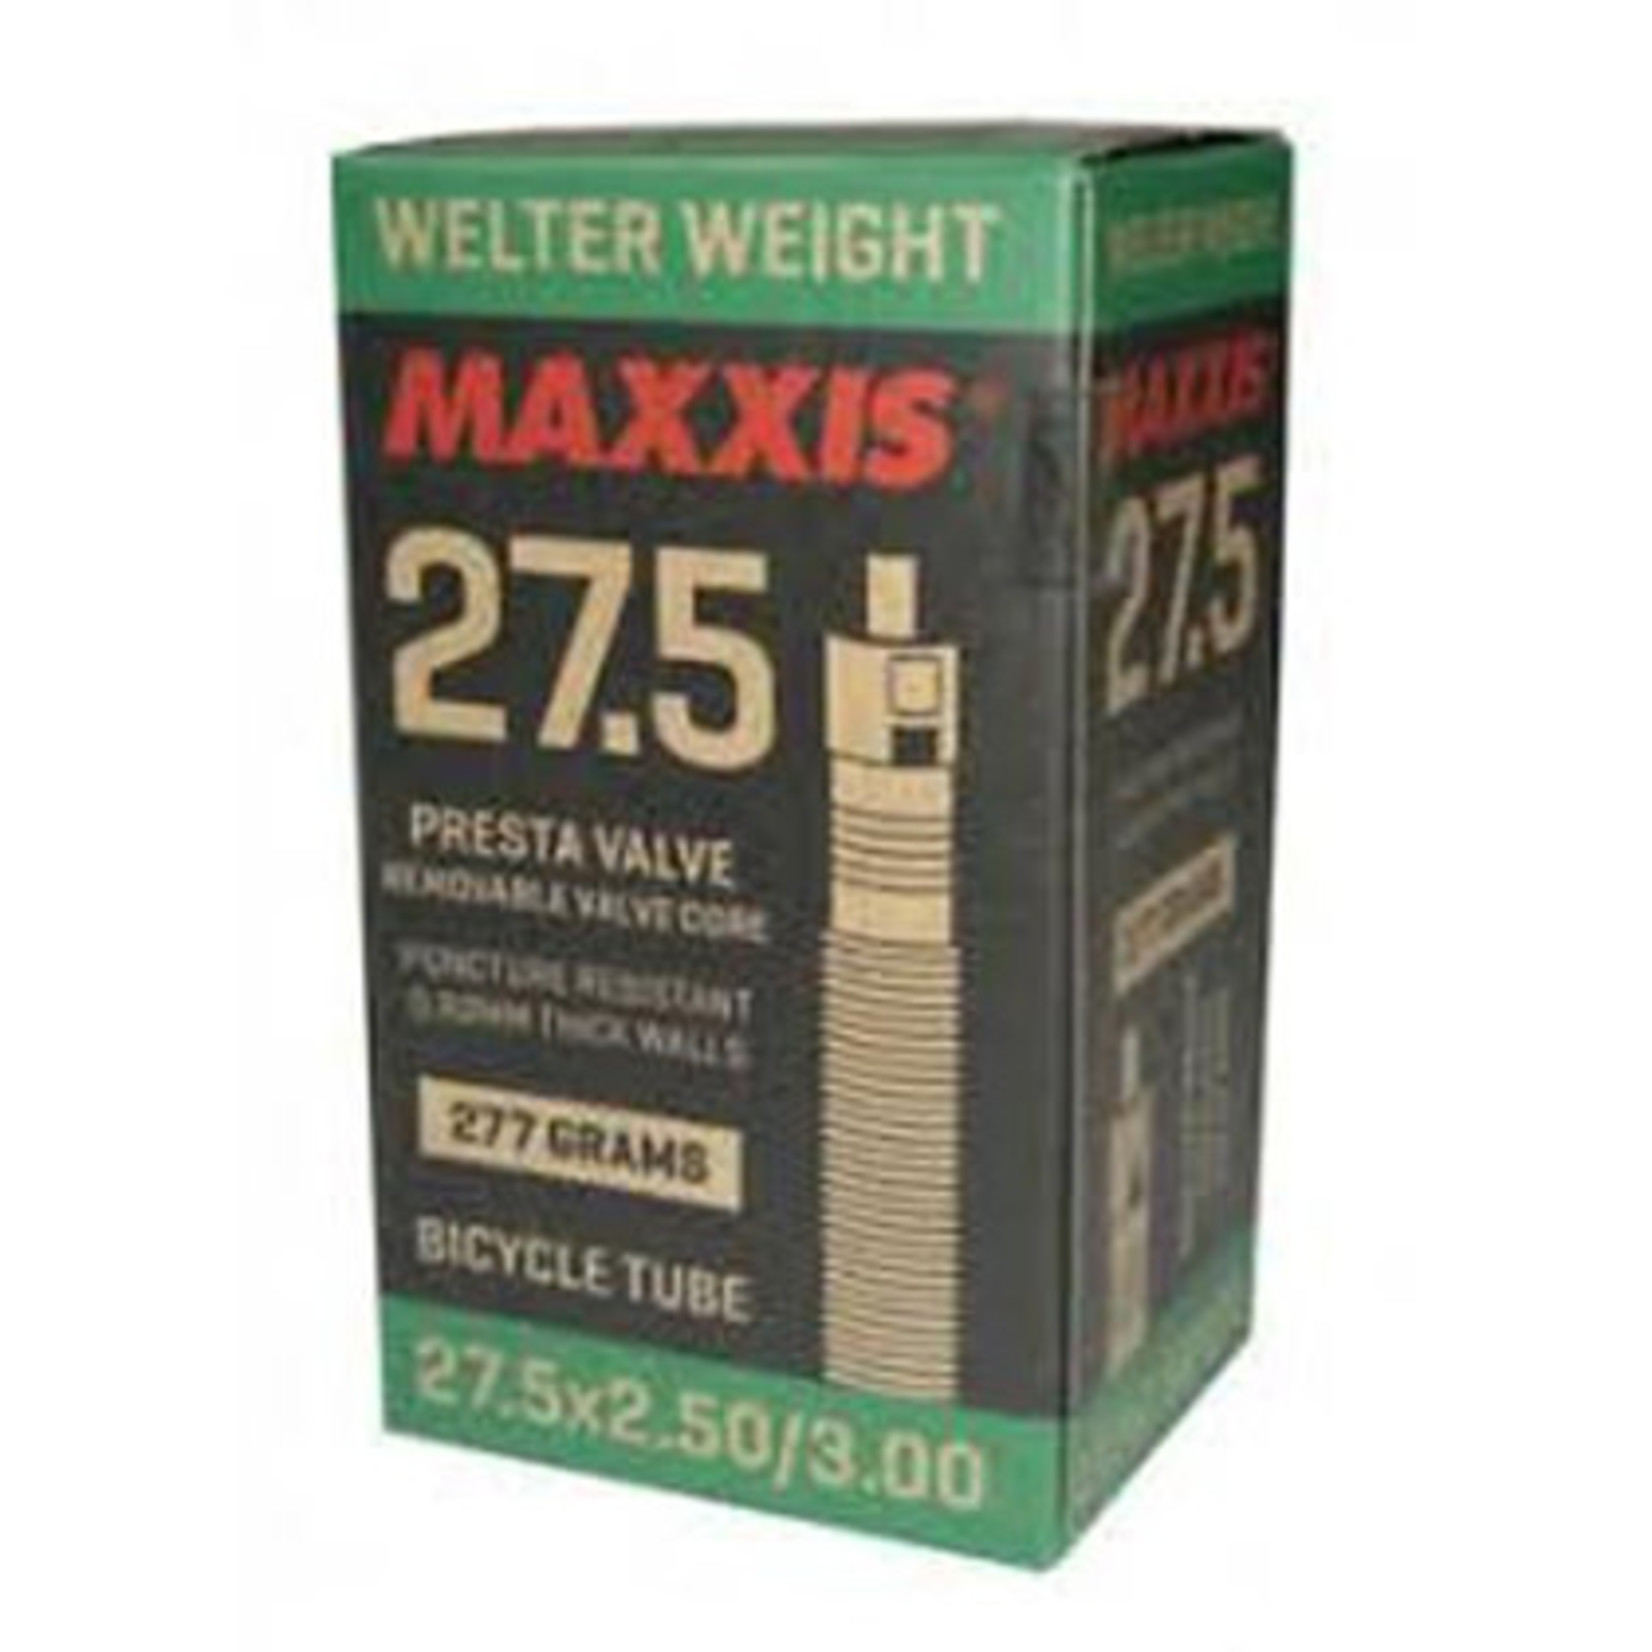 MAXXIS MAXXIS WELTERWEIGHT TUBE 27.5 X 2.0/3.0 PV48